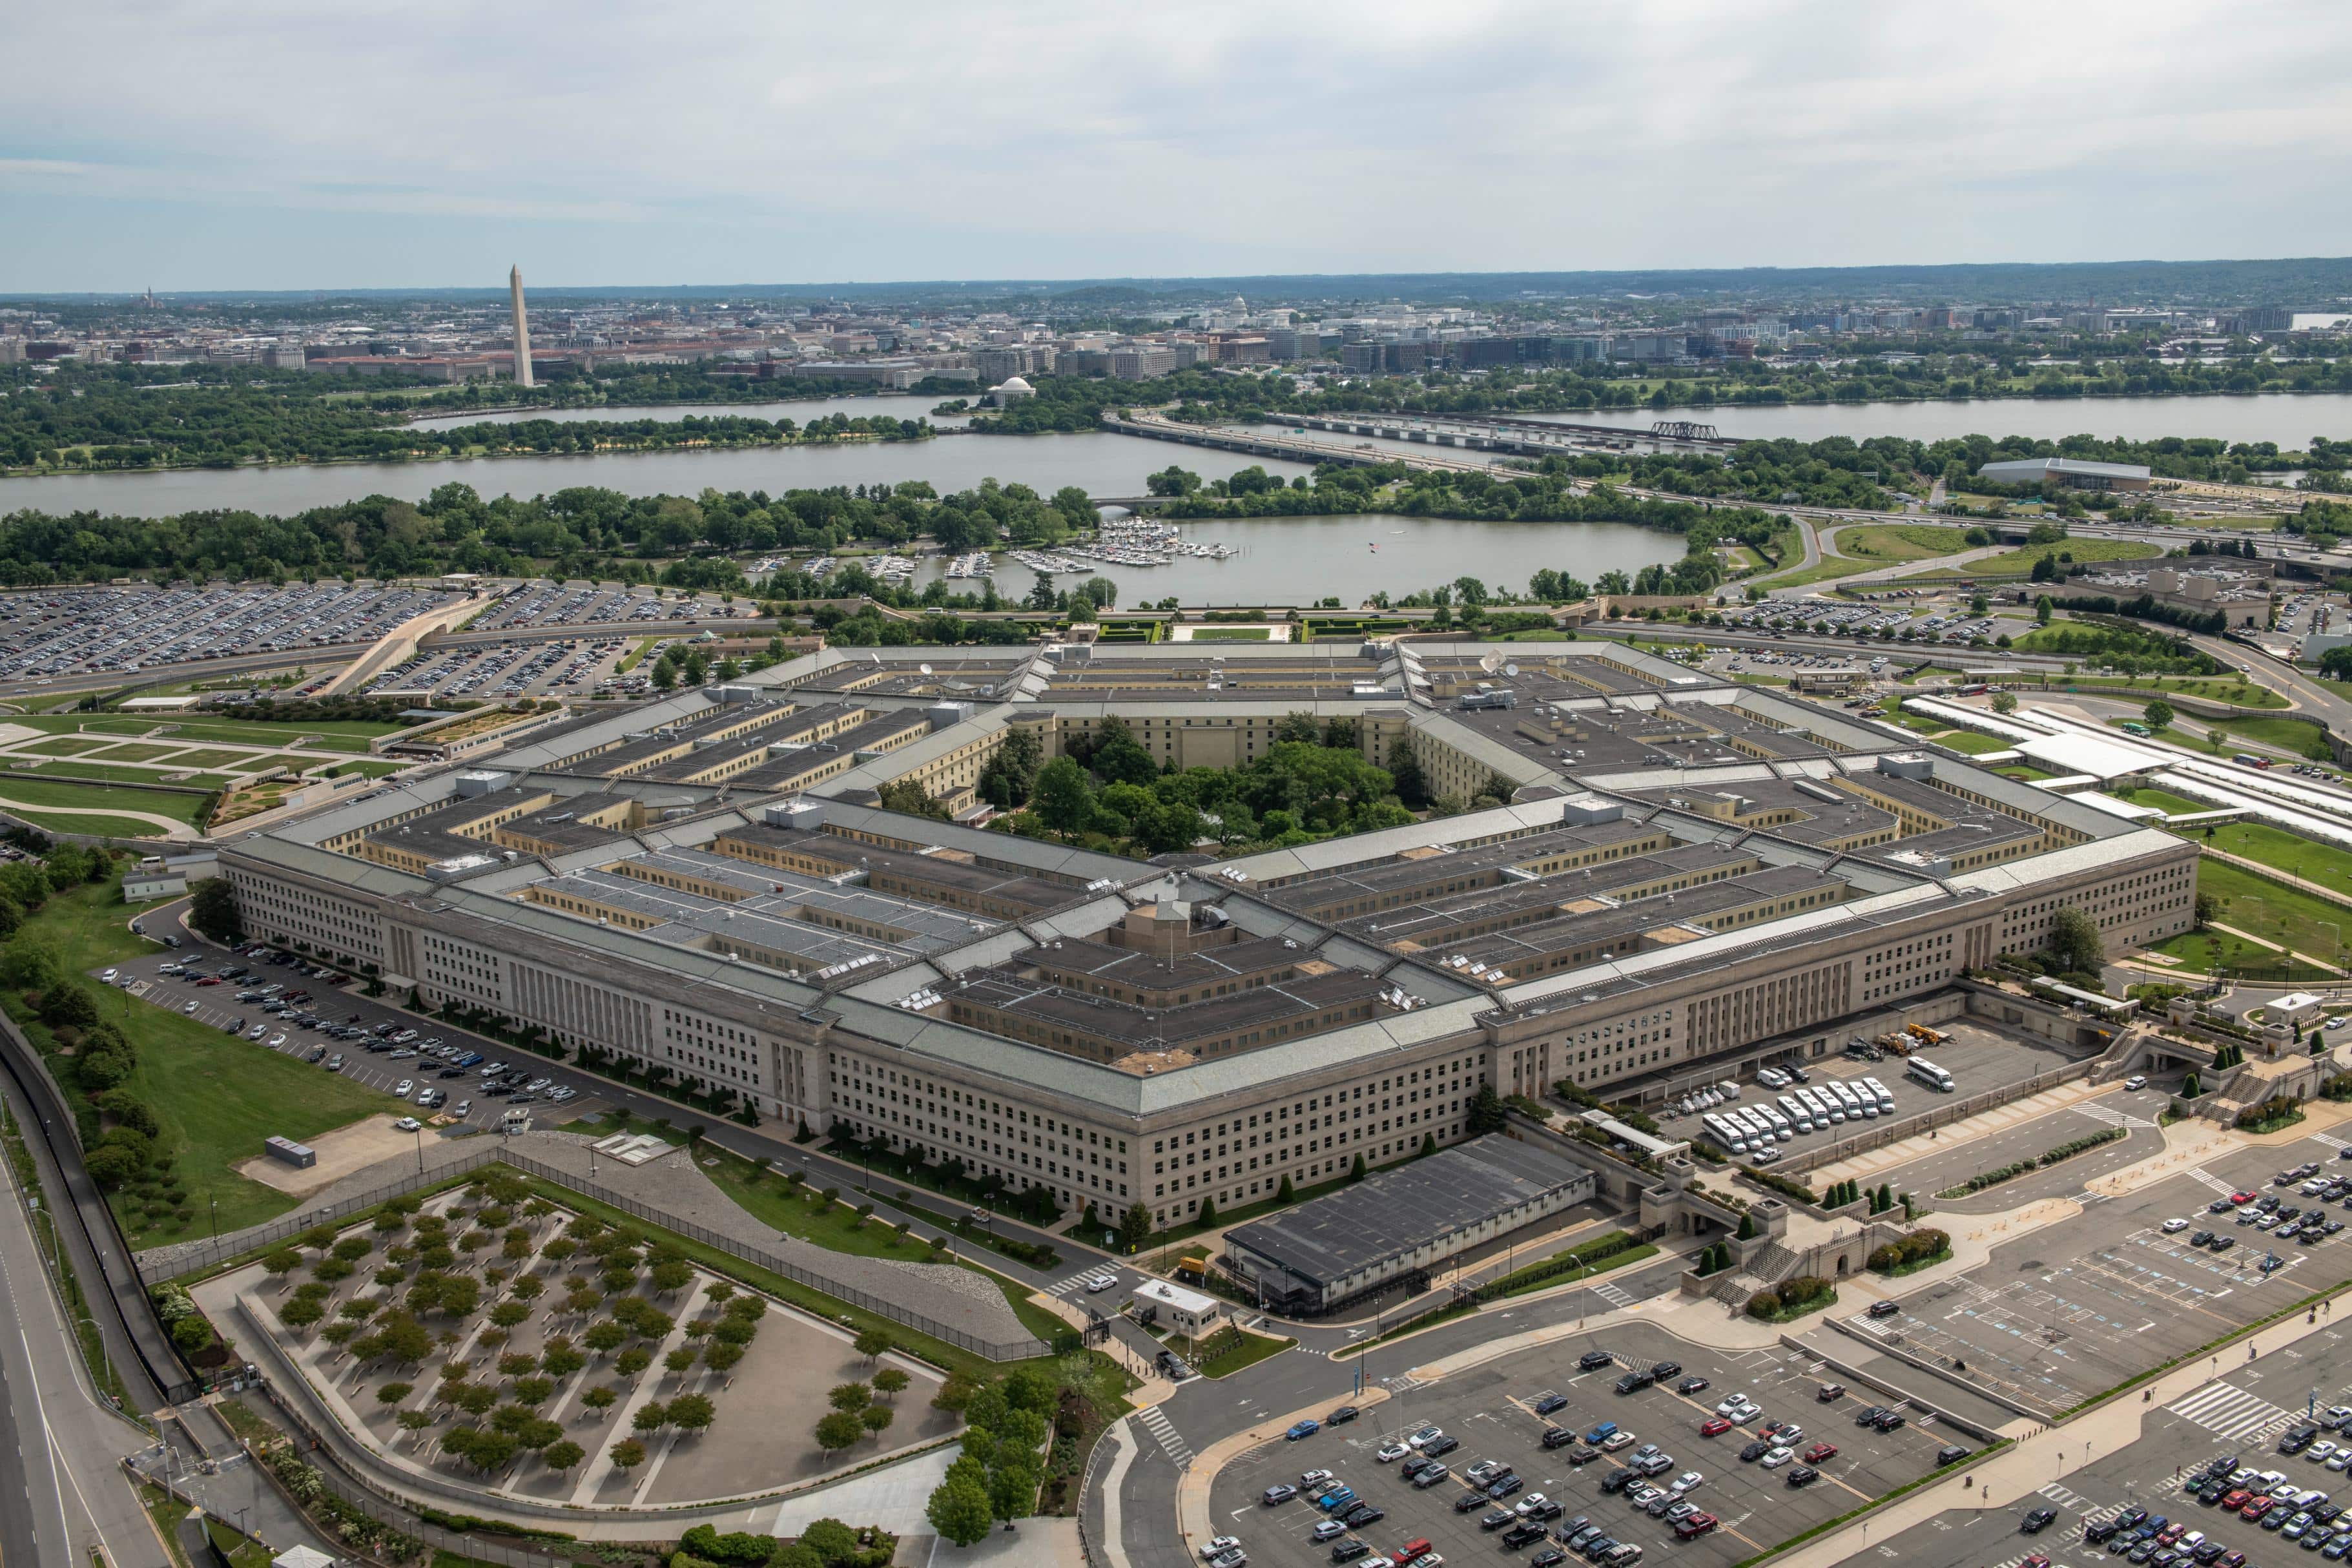 An aerial view of the Pentagon, Washington, D.C., May 11, 2021. (DOD photo by U.S. Air Force Staff Sgt. Brittany A. Chase)